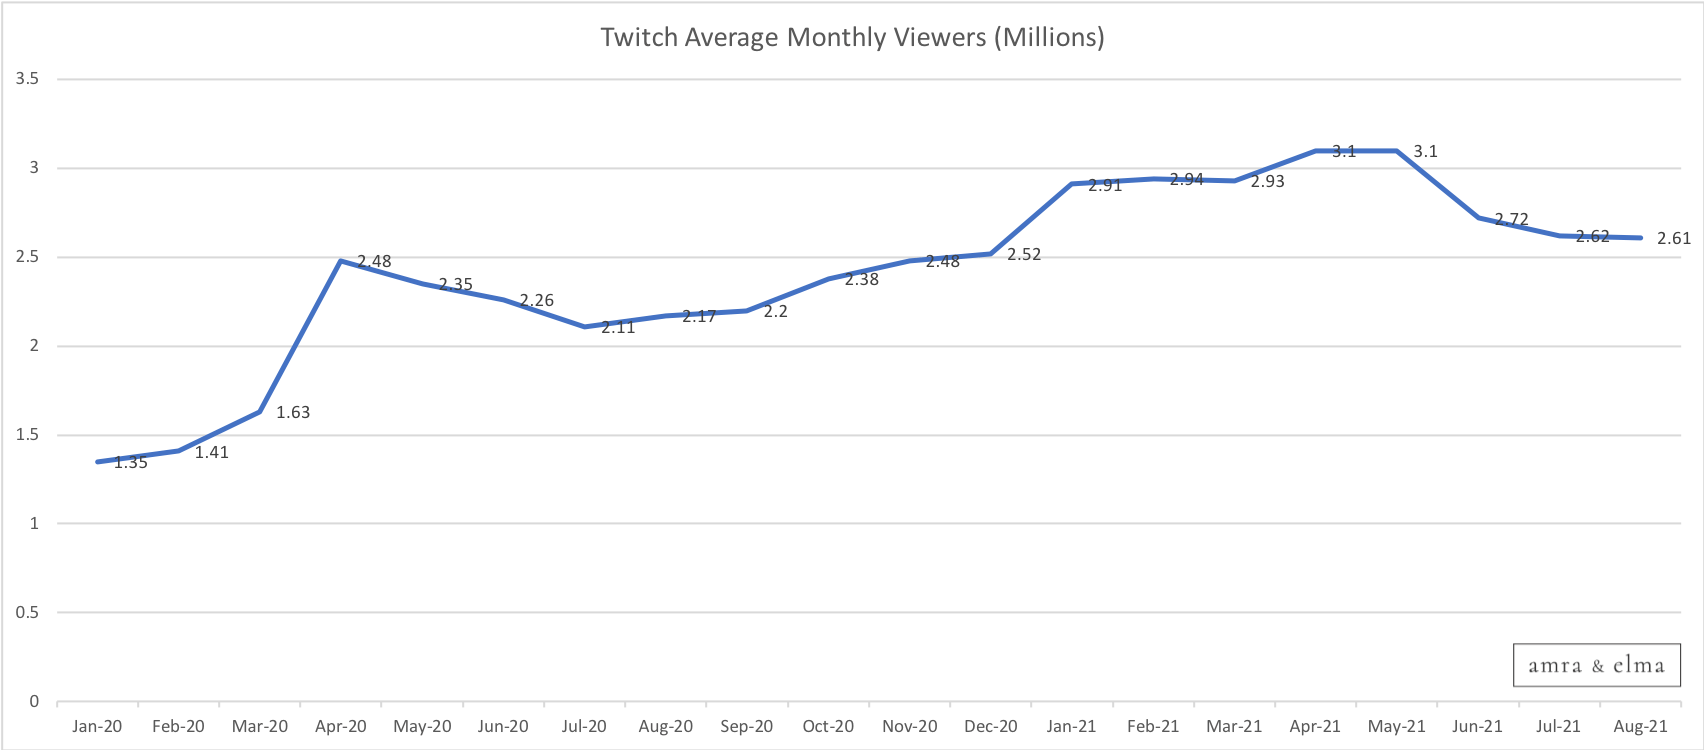 Twitch Growth Statistics Report for 2021